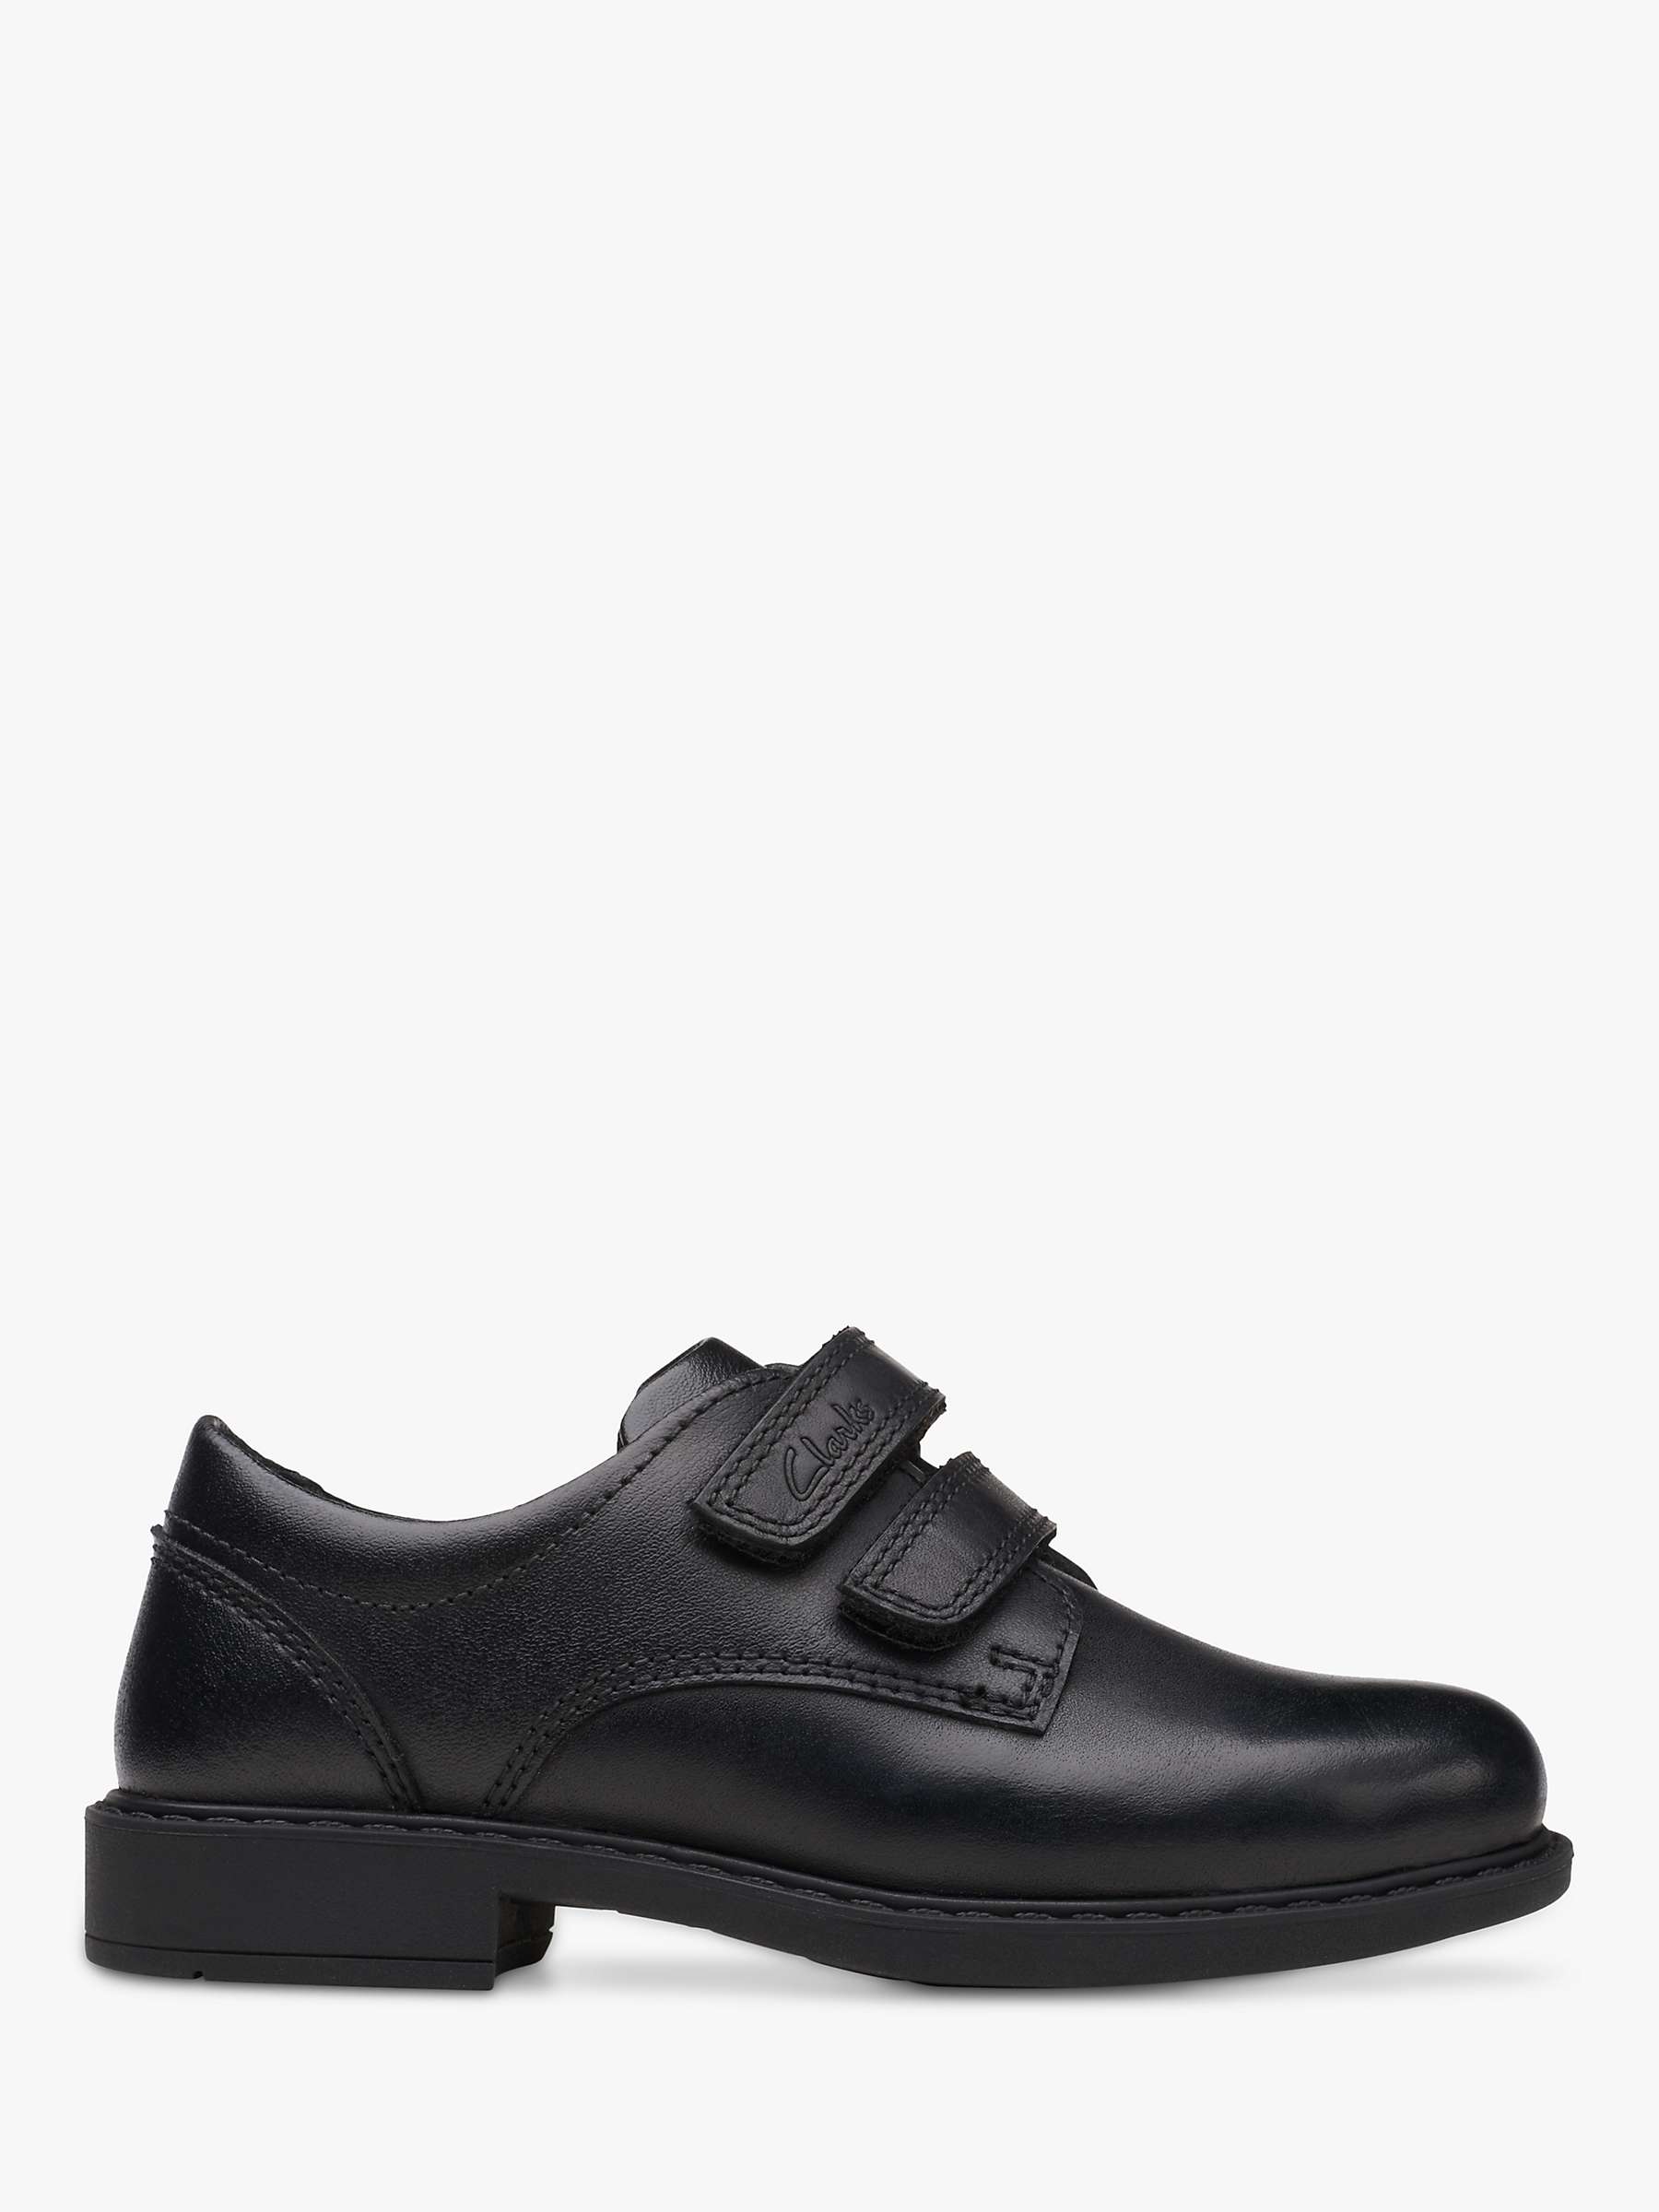 Buy Clarks Kids' Scala Pace School Shoes Online at johnlewis.com